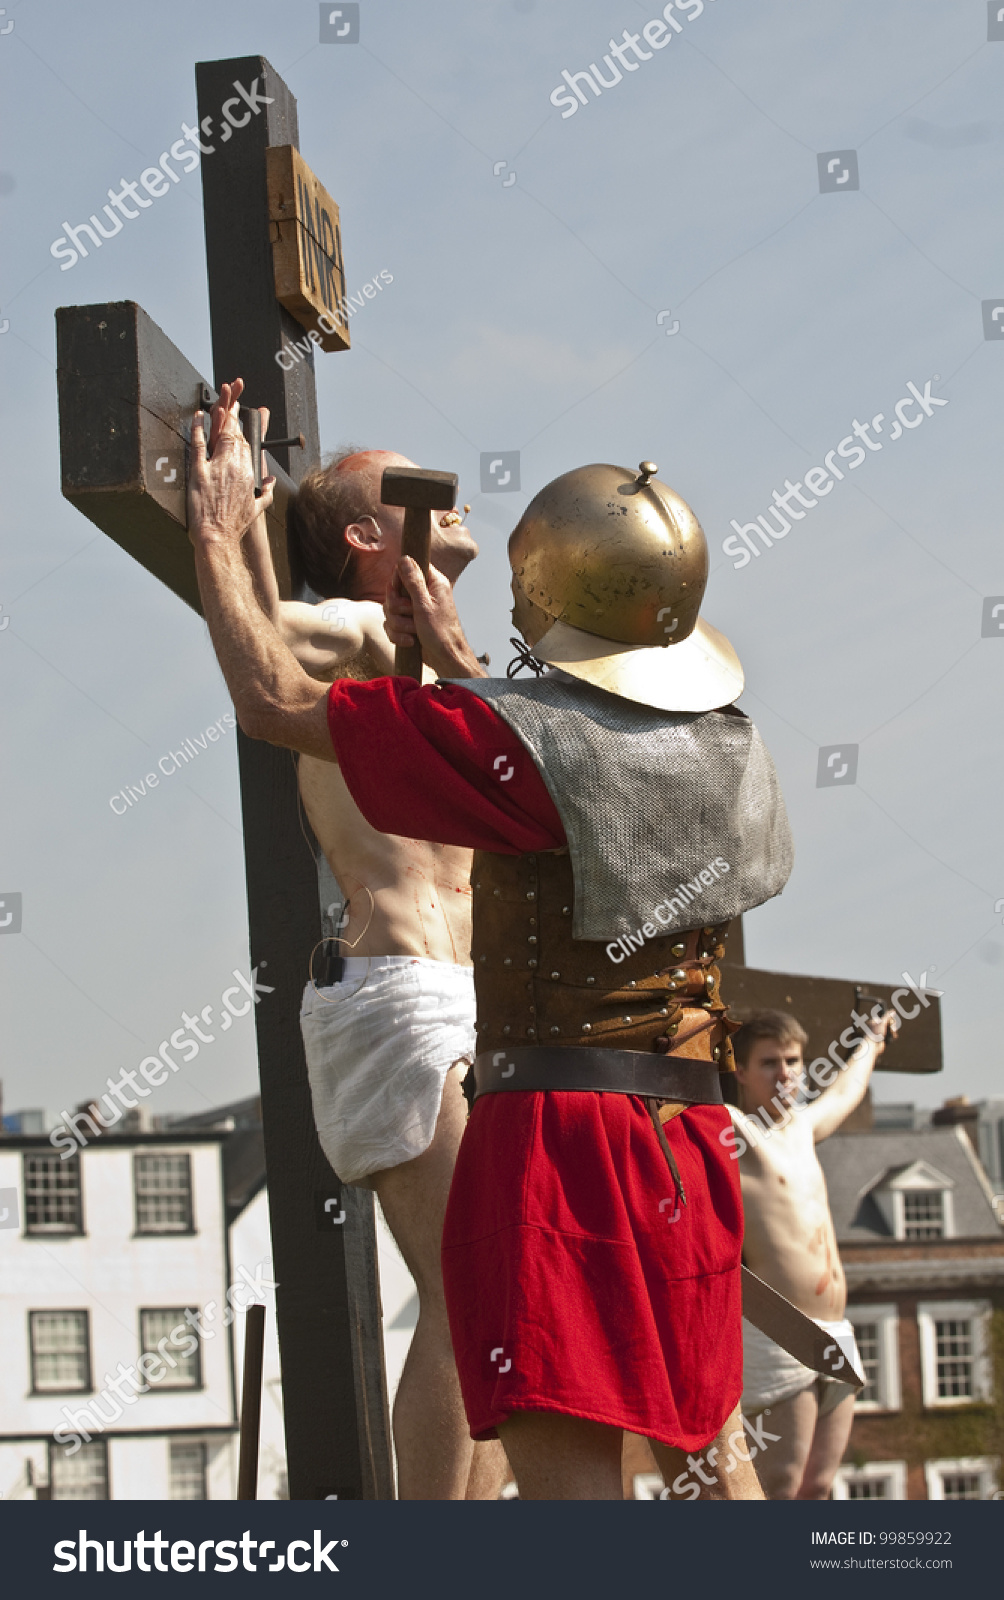 Exeter April Jesus S Hands Are Nailed To The Cross As Part Of The Crucifixion Reenactment